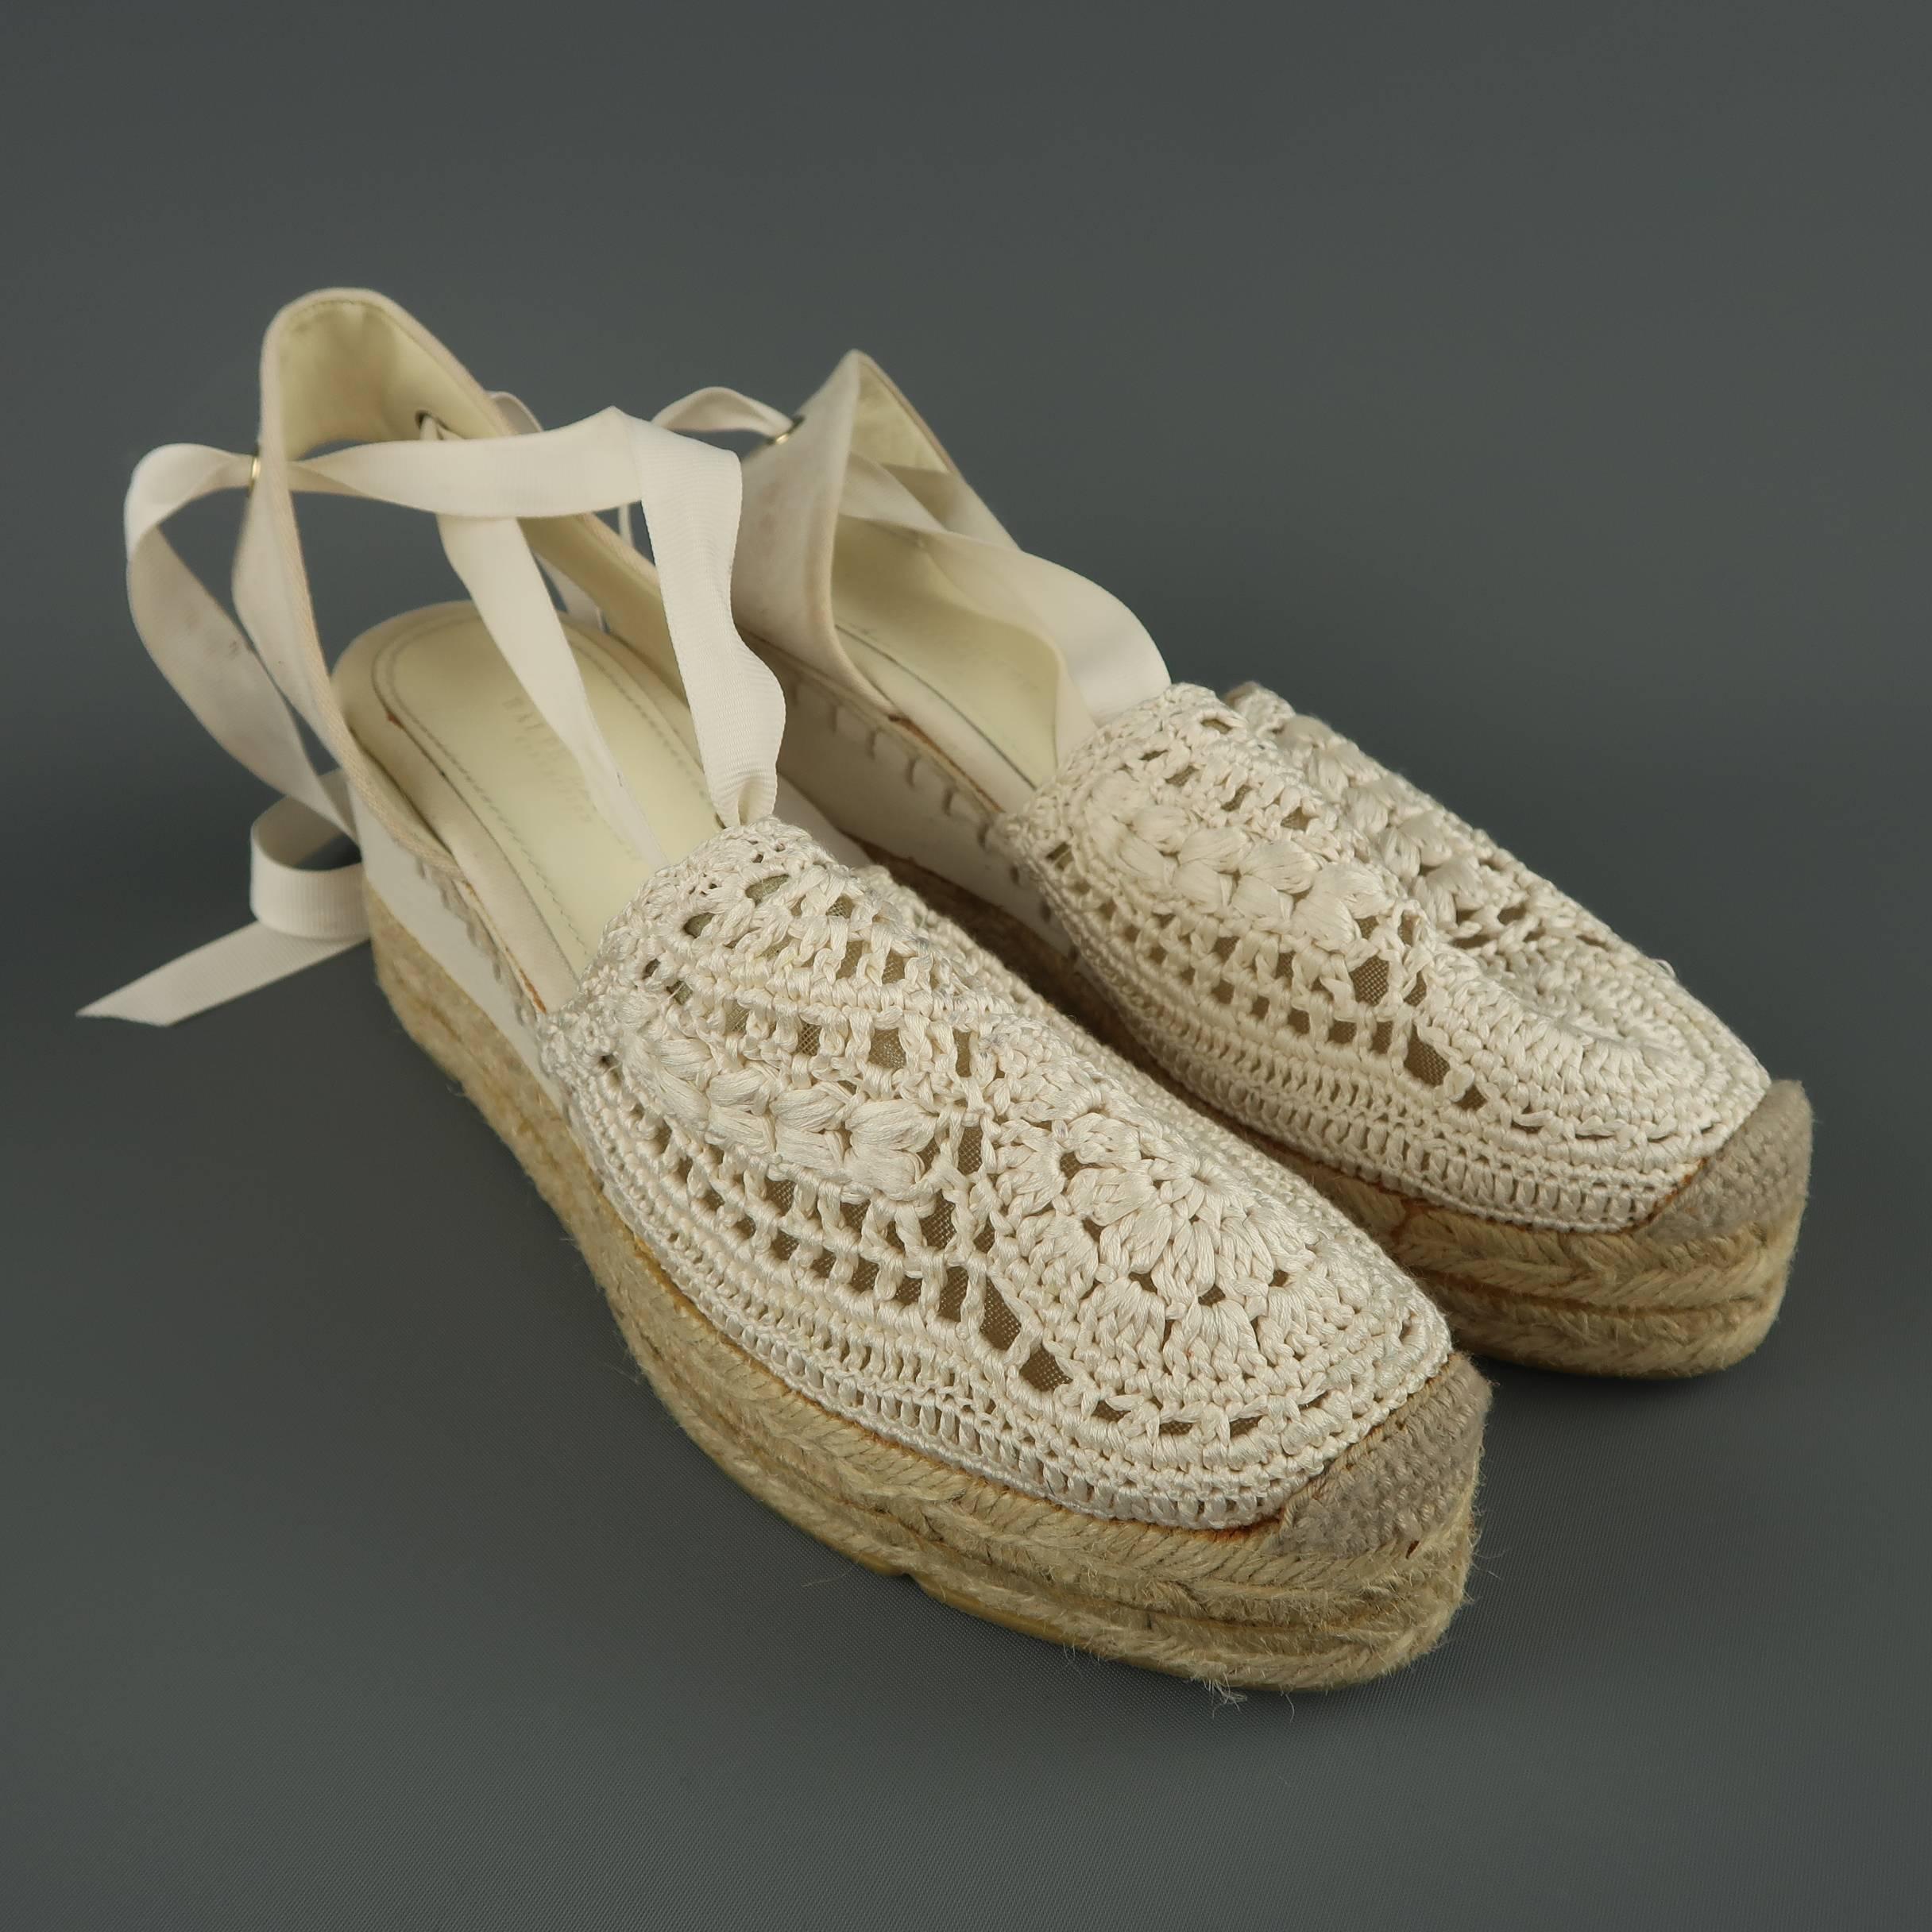 RALPH LAUREN COLLECTION espadrilles feature a cream crochet front,  canvas slingback with ankle ties, and platform wedge sole. Discolorations throughout. As-is.
 
Fair Pre-Owned Condition.
Marked: 10
 
Heel: 2.5 in.
